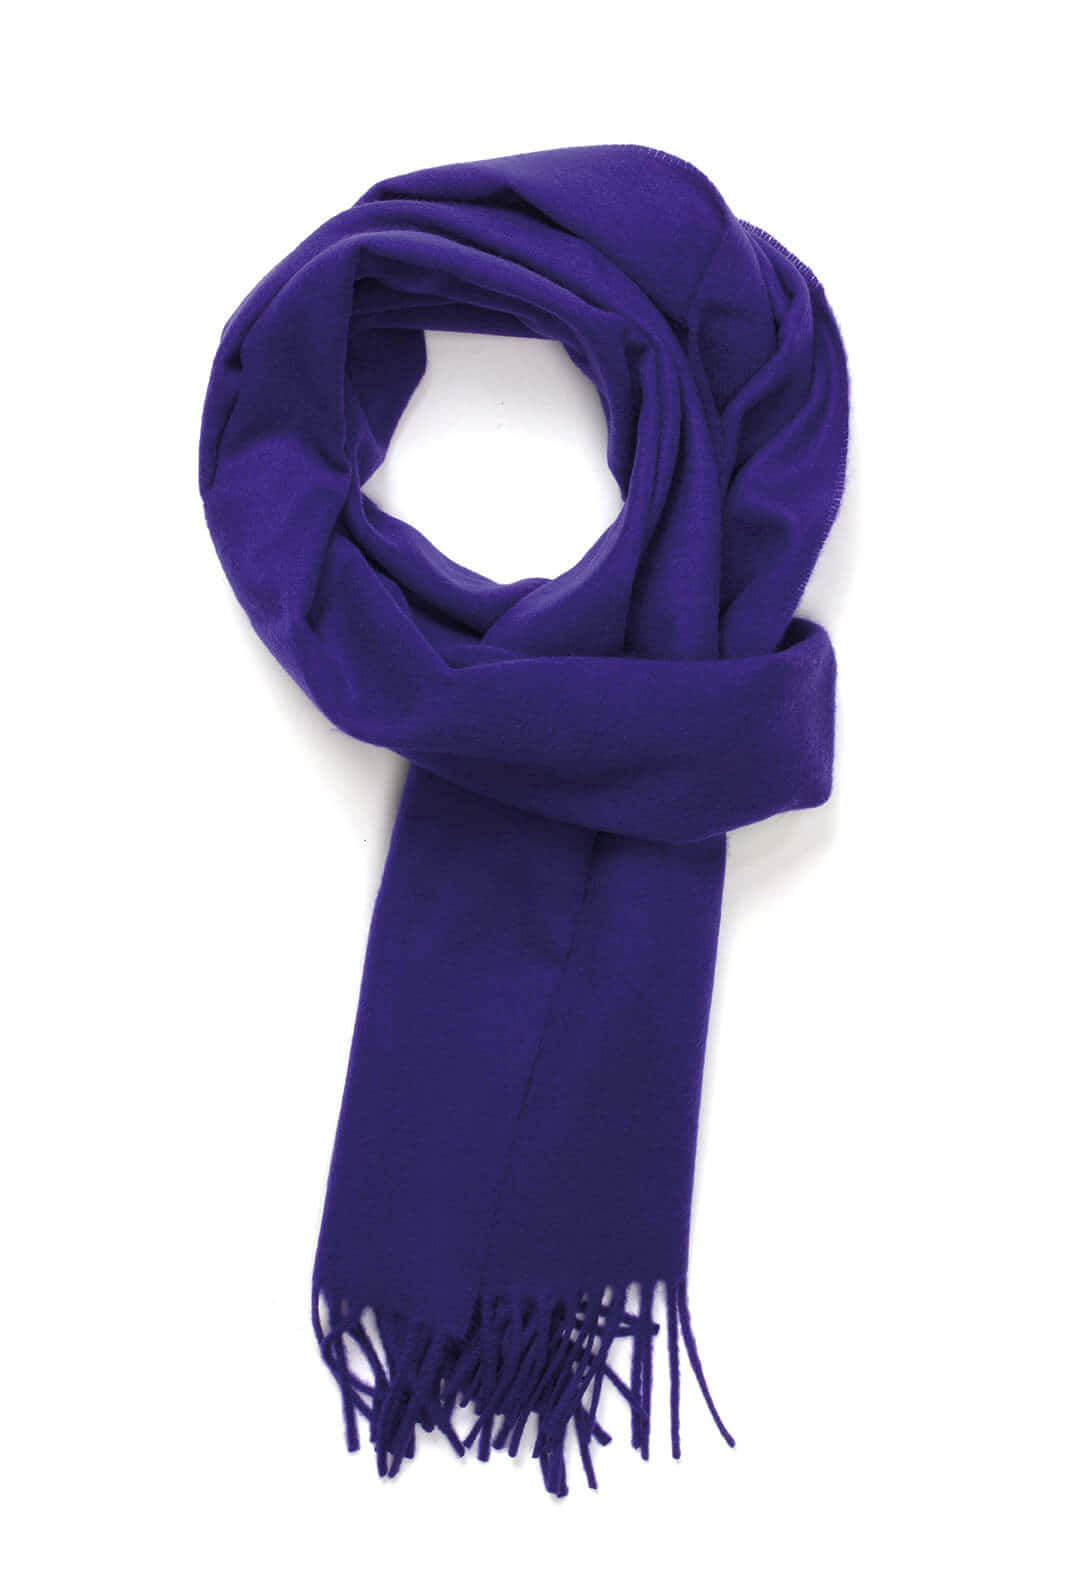 Look beautiful and chic with a Purple Scarf Wallpaper